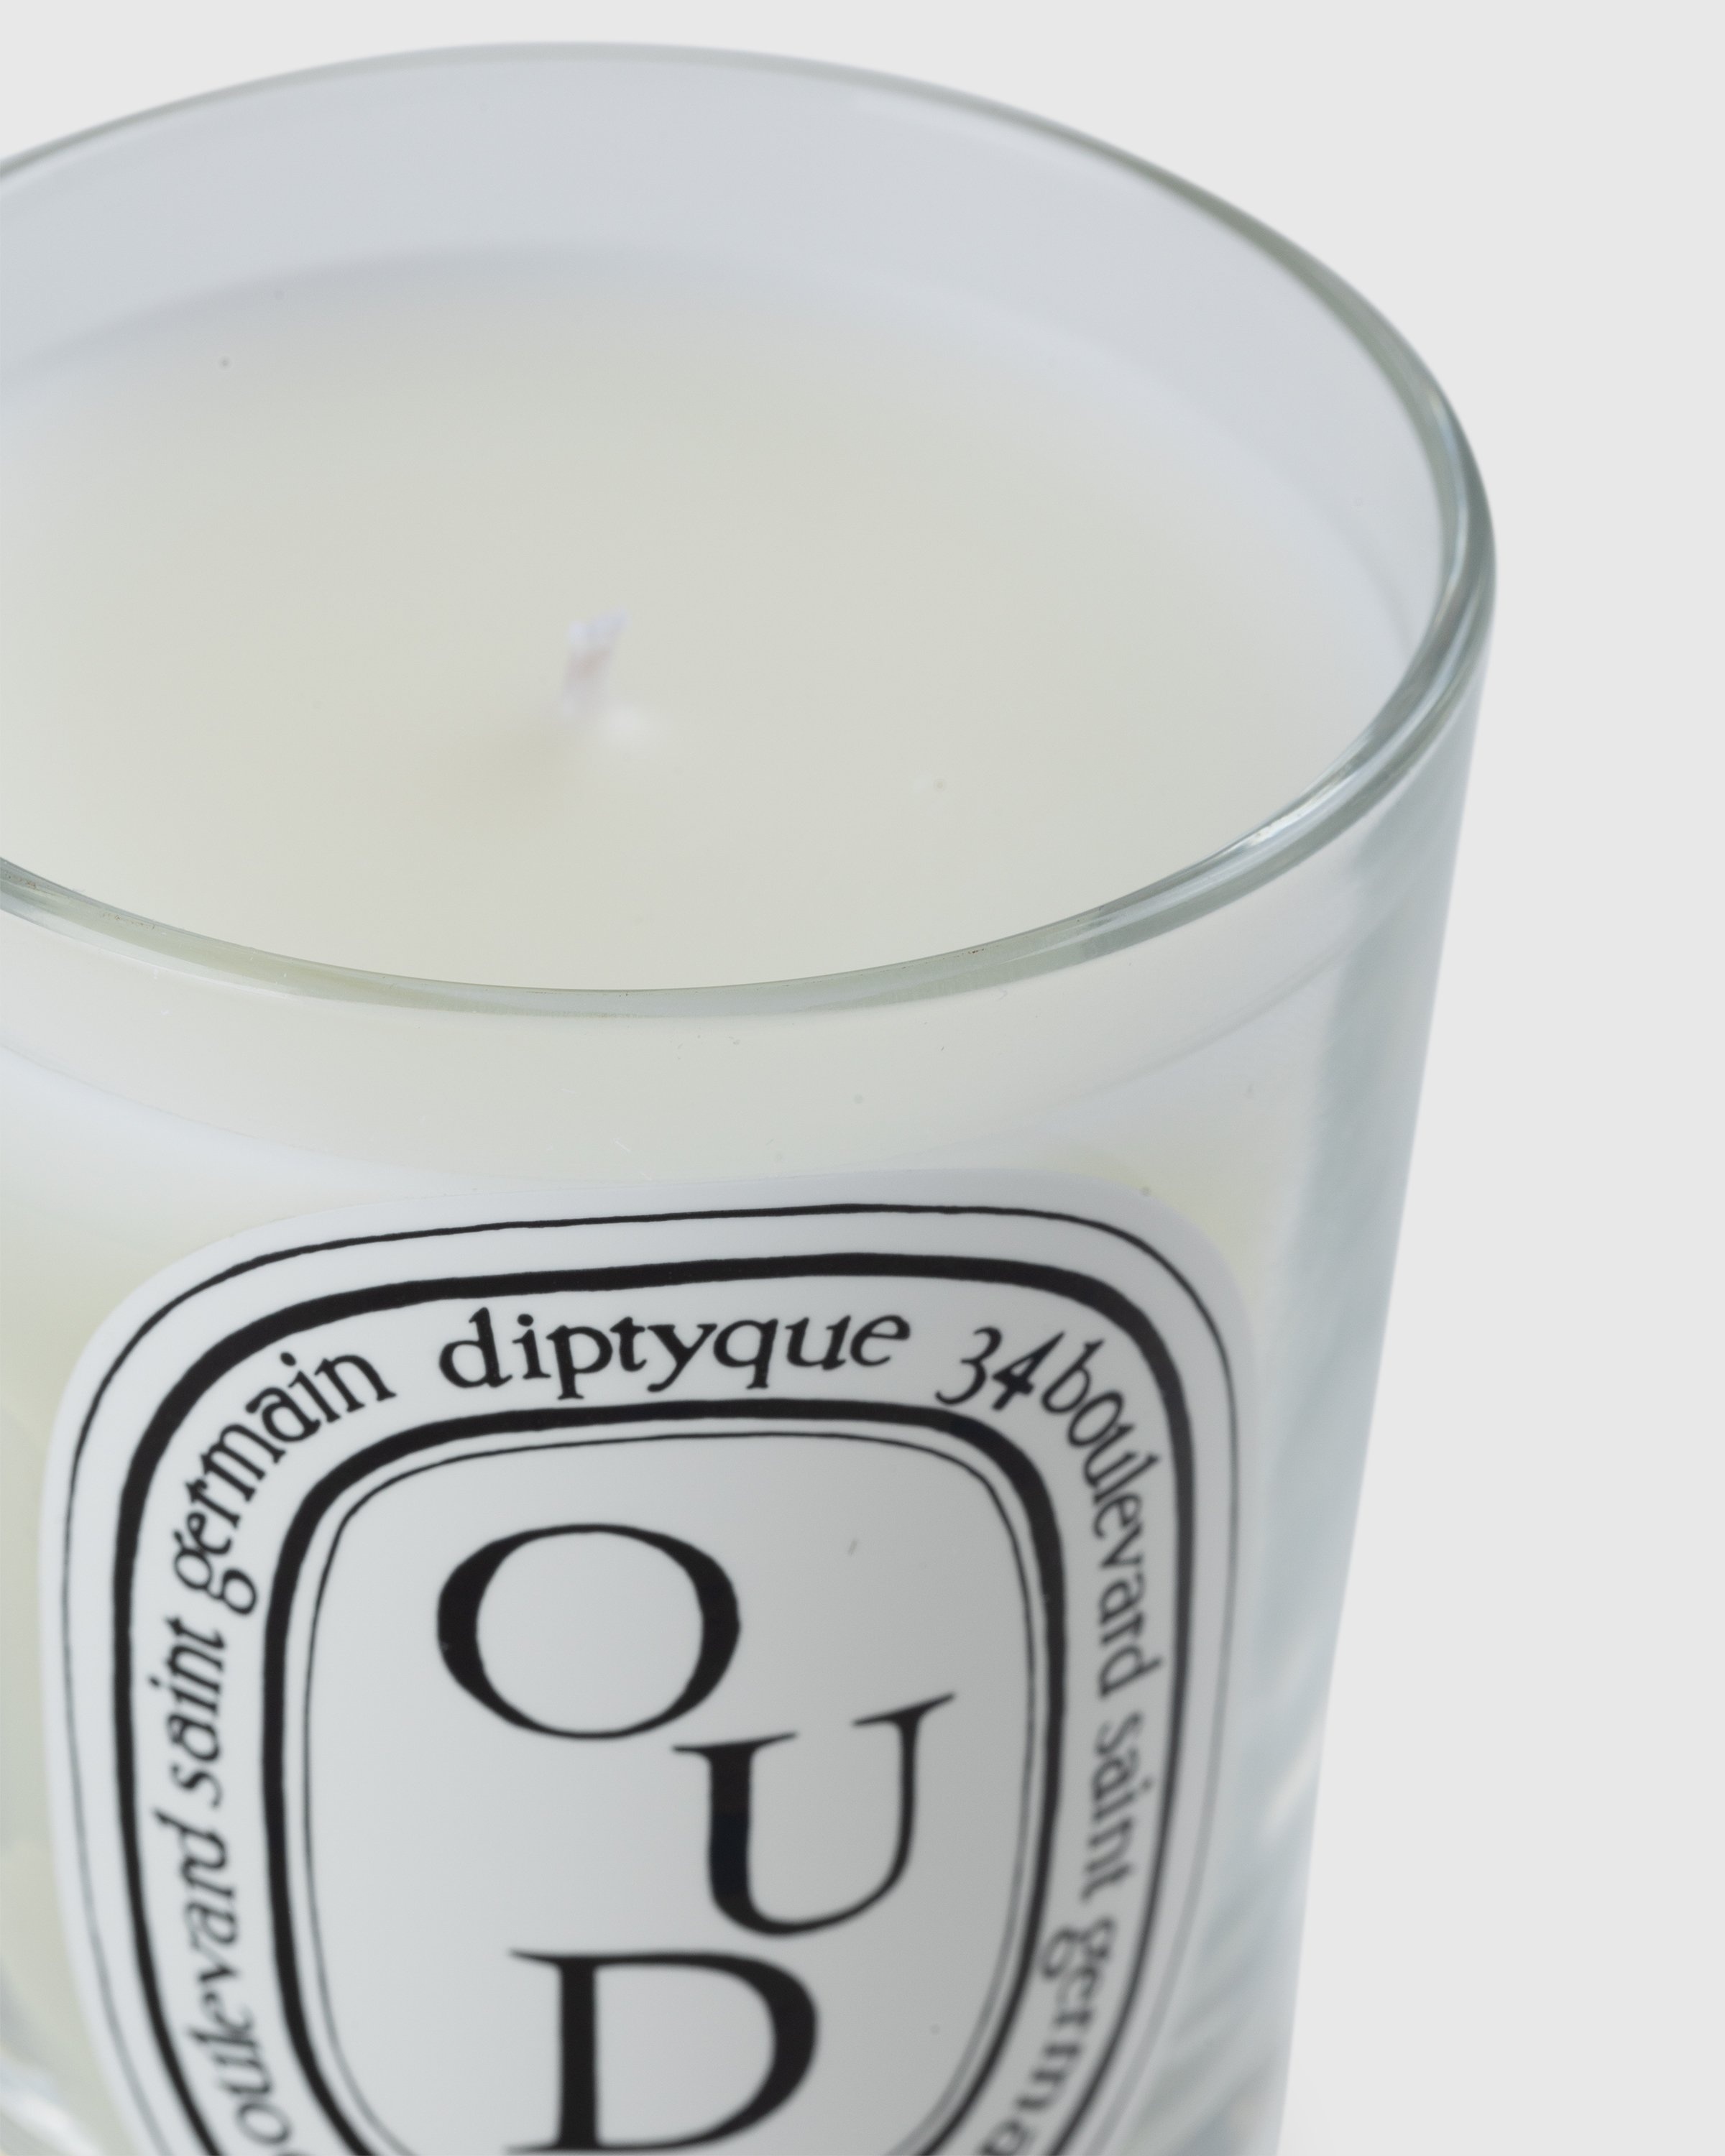 Diptyque – Standard Candle Oud 190g - Candles - White - Image 2